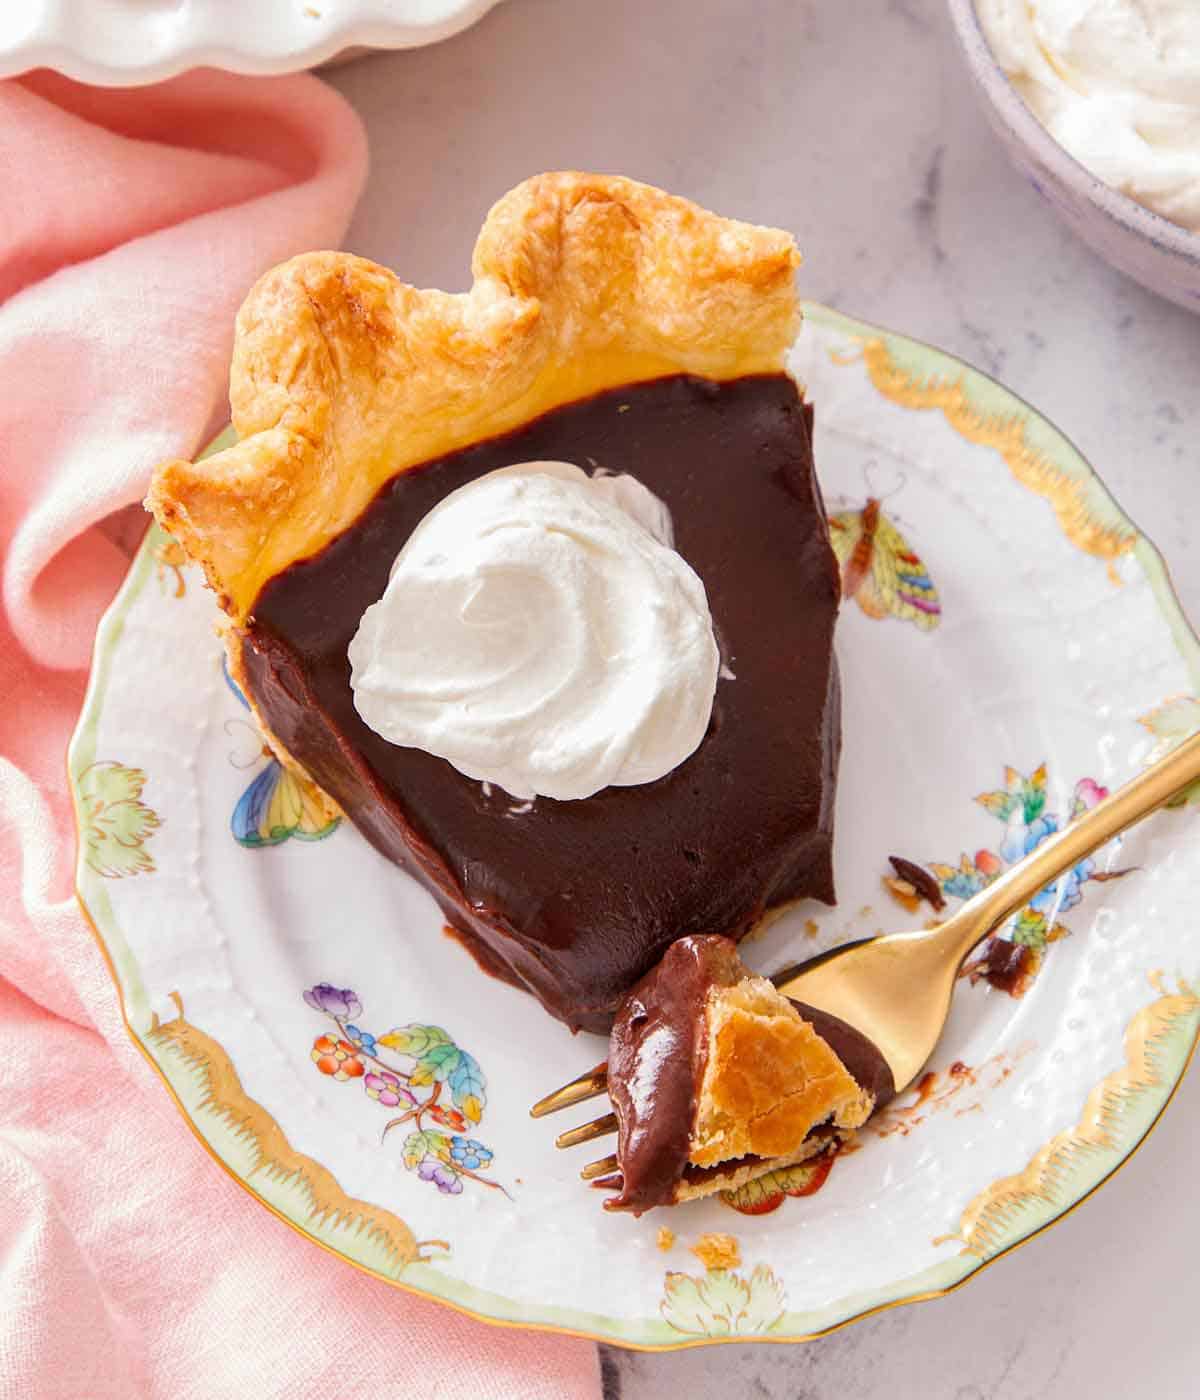 A plate with a slice of chocolate pie with a dollop of whipped cream on top.